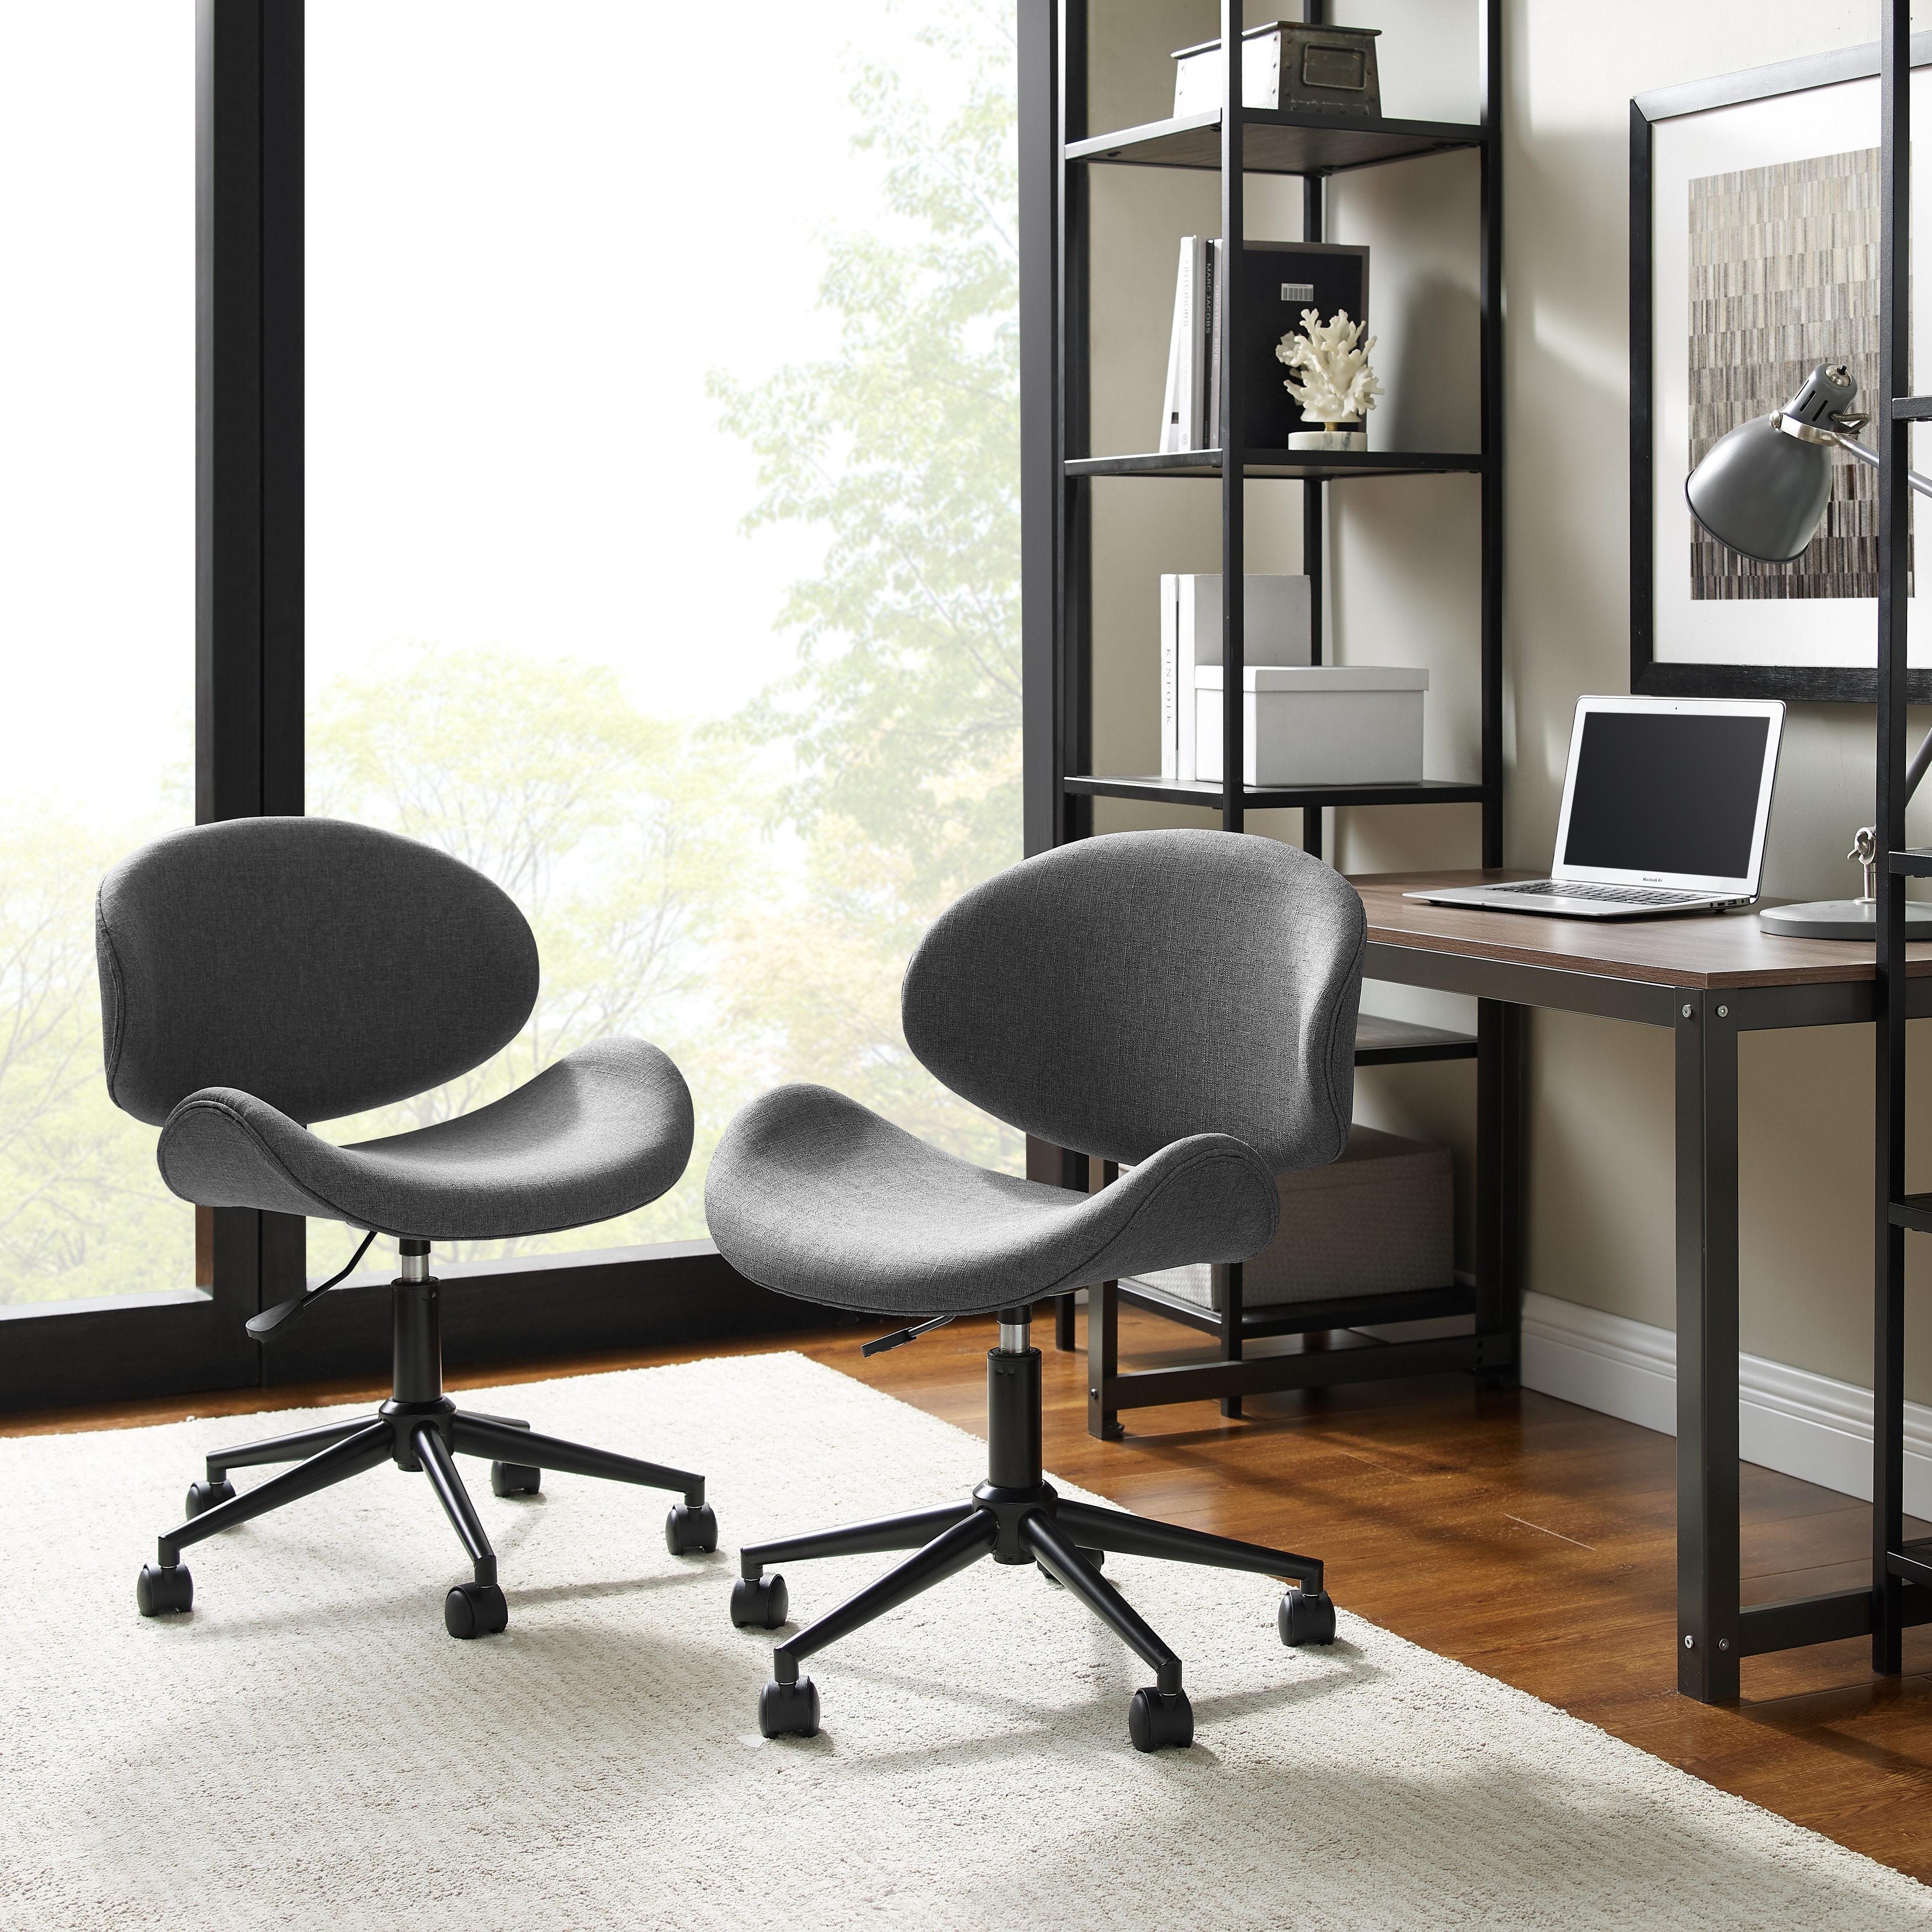 https://ak1.ostkcdn.com/images/products/is/images/direct/dea0797771e15cf84bb8fcb0924e7999e72d1eae/Madonna-Mid-century-Modern-Adjustable-Curved-Office-Chair-by-Corvus.jpg